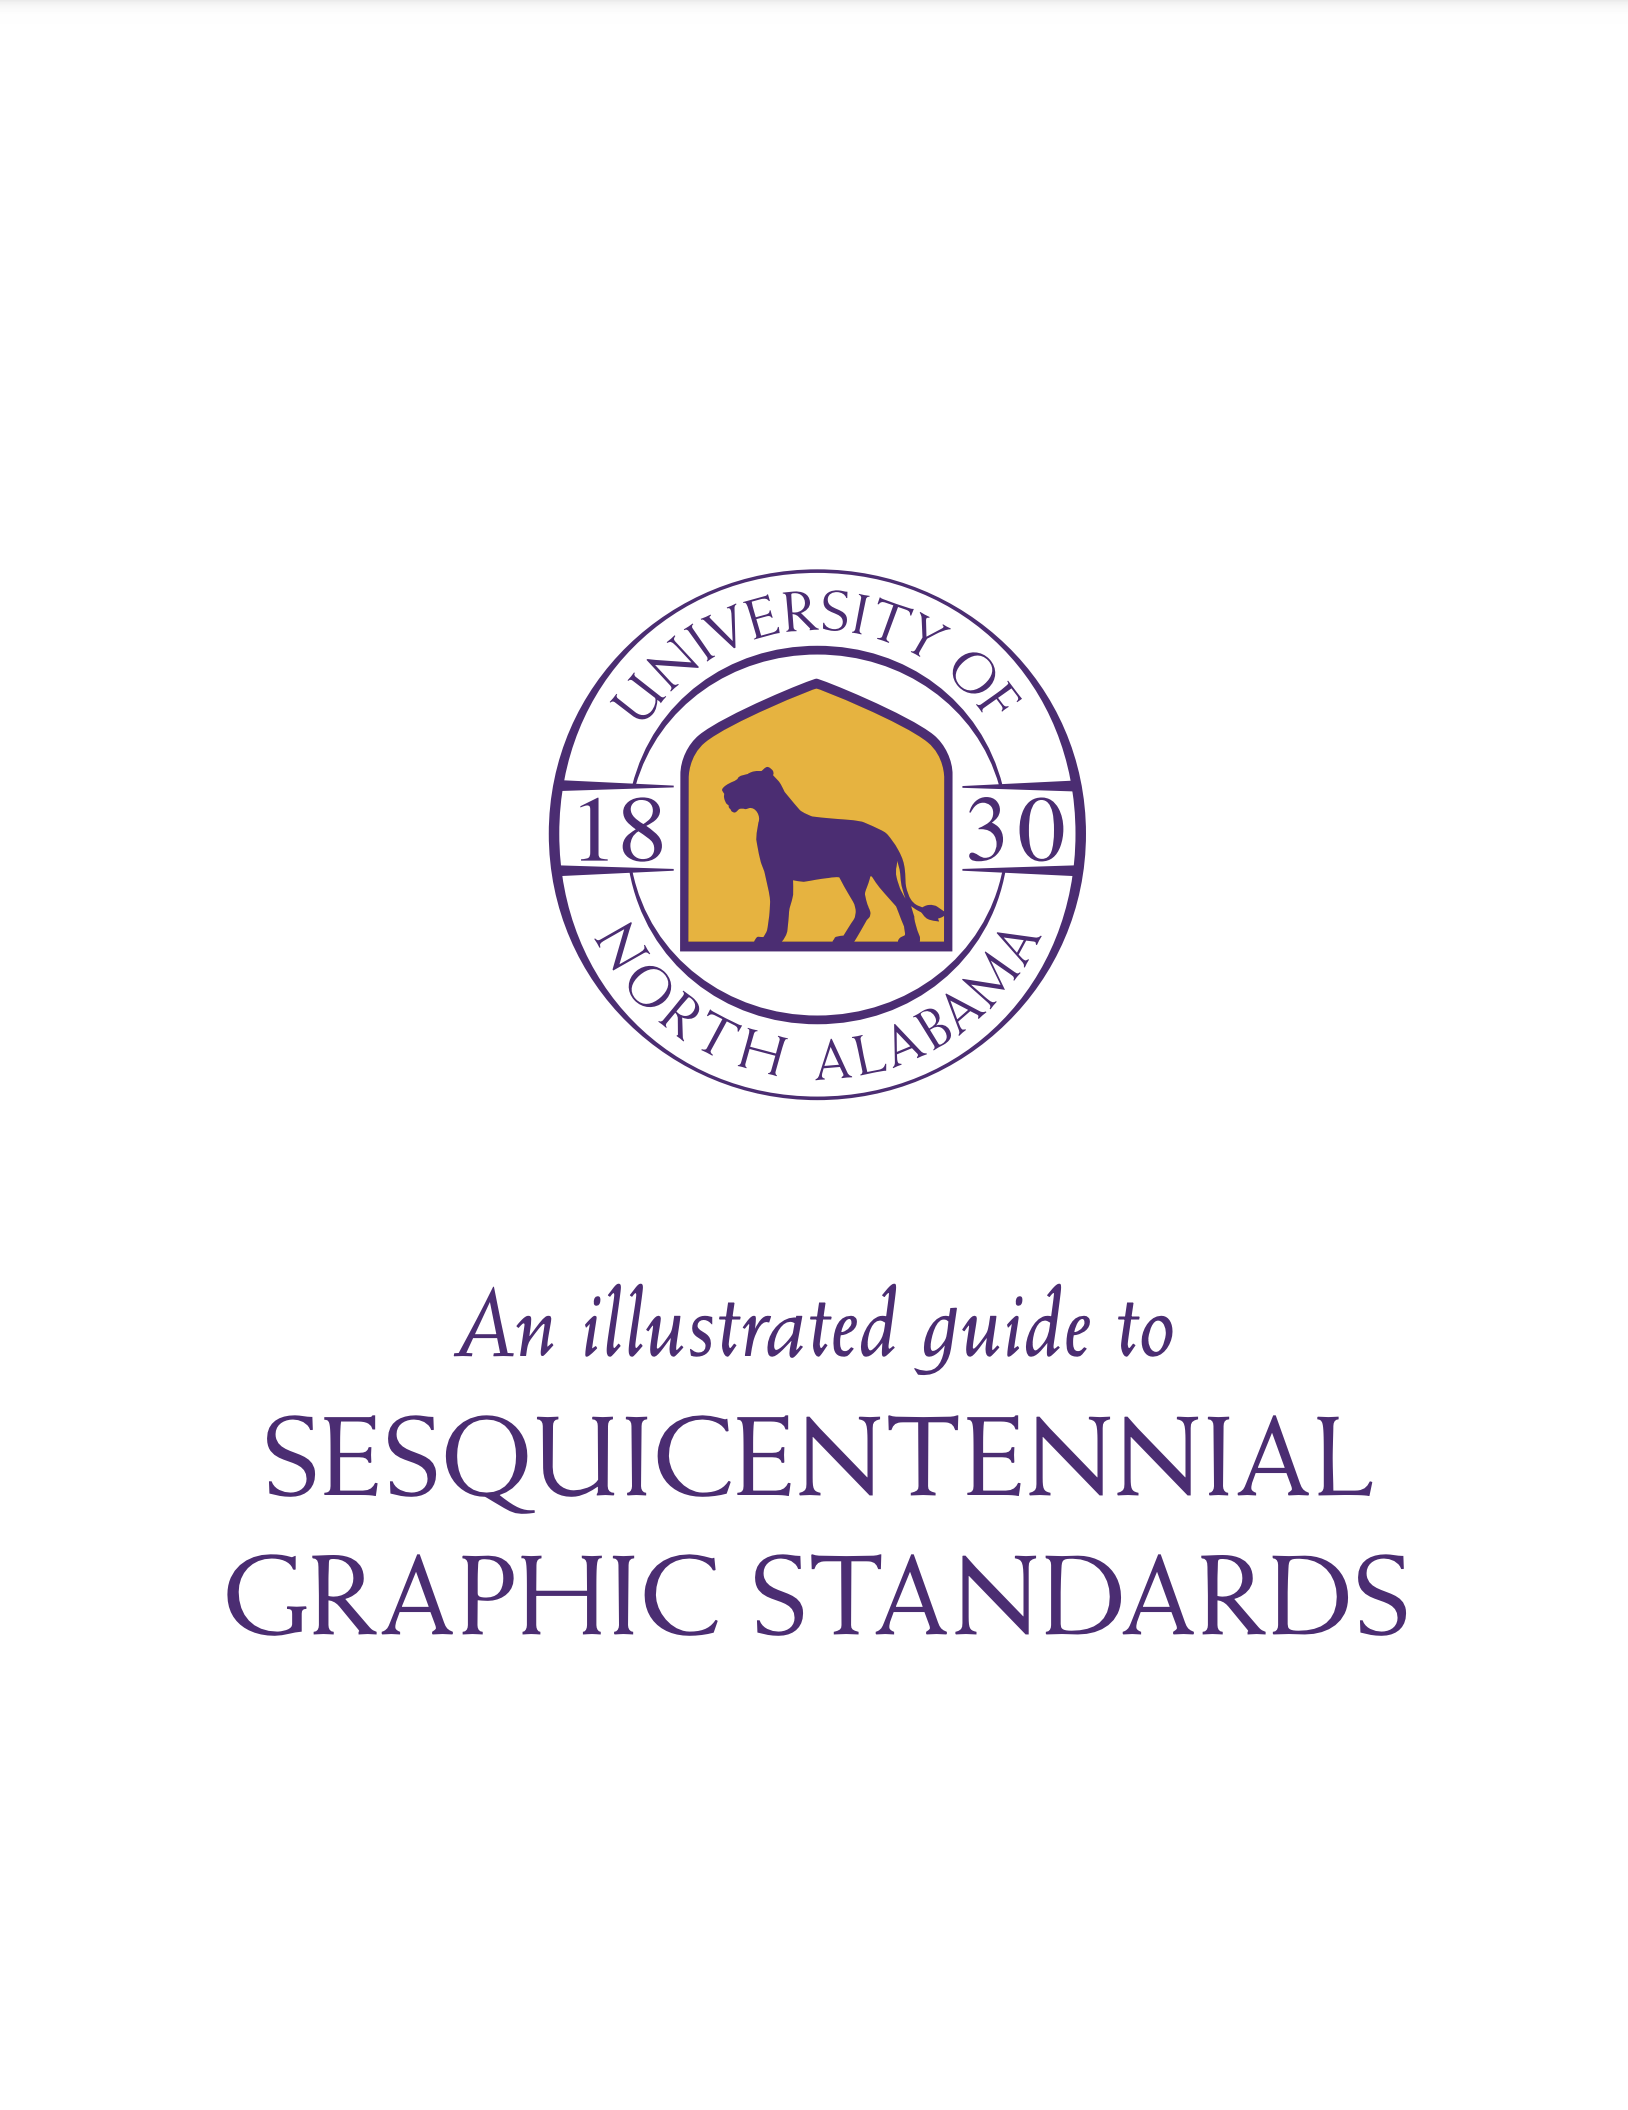 SES Graphic Standards logo